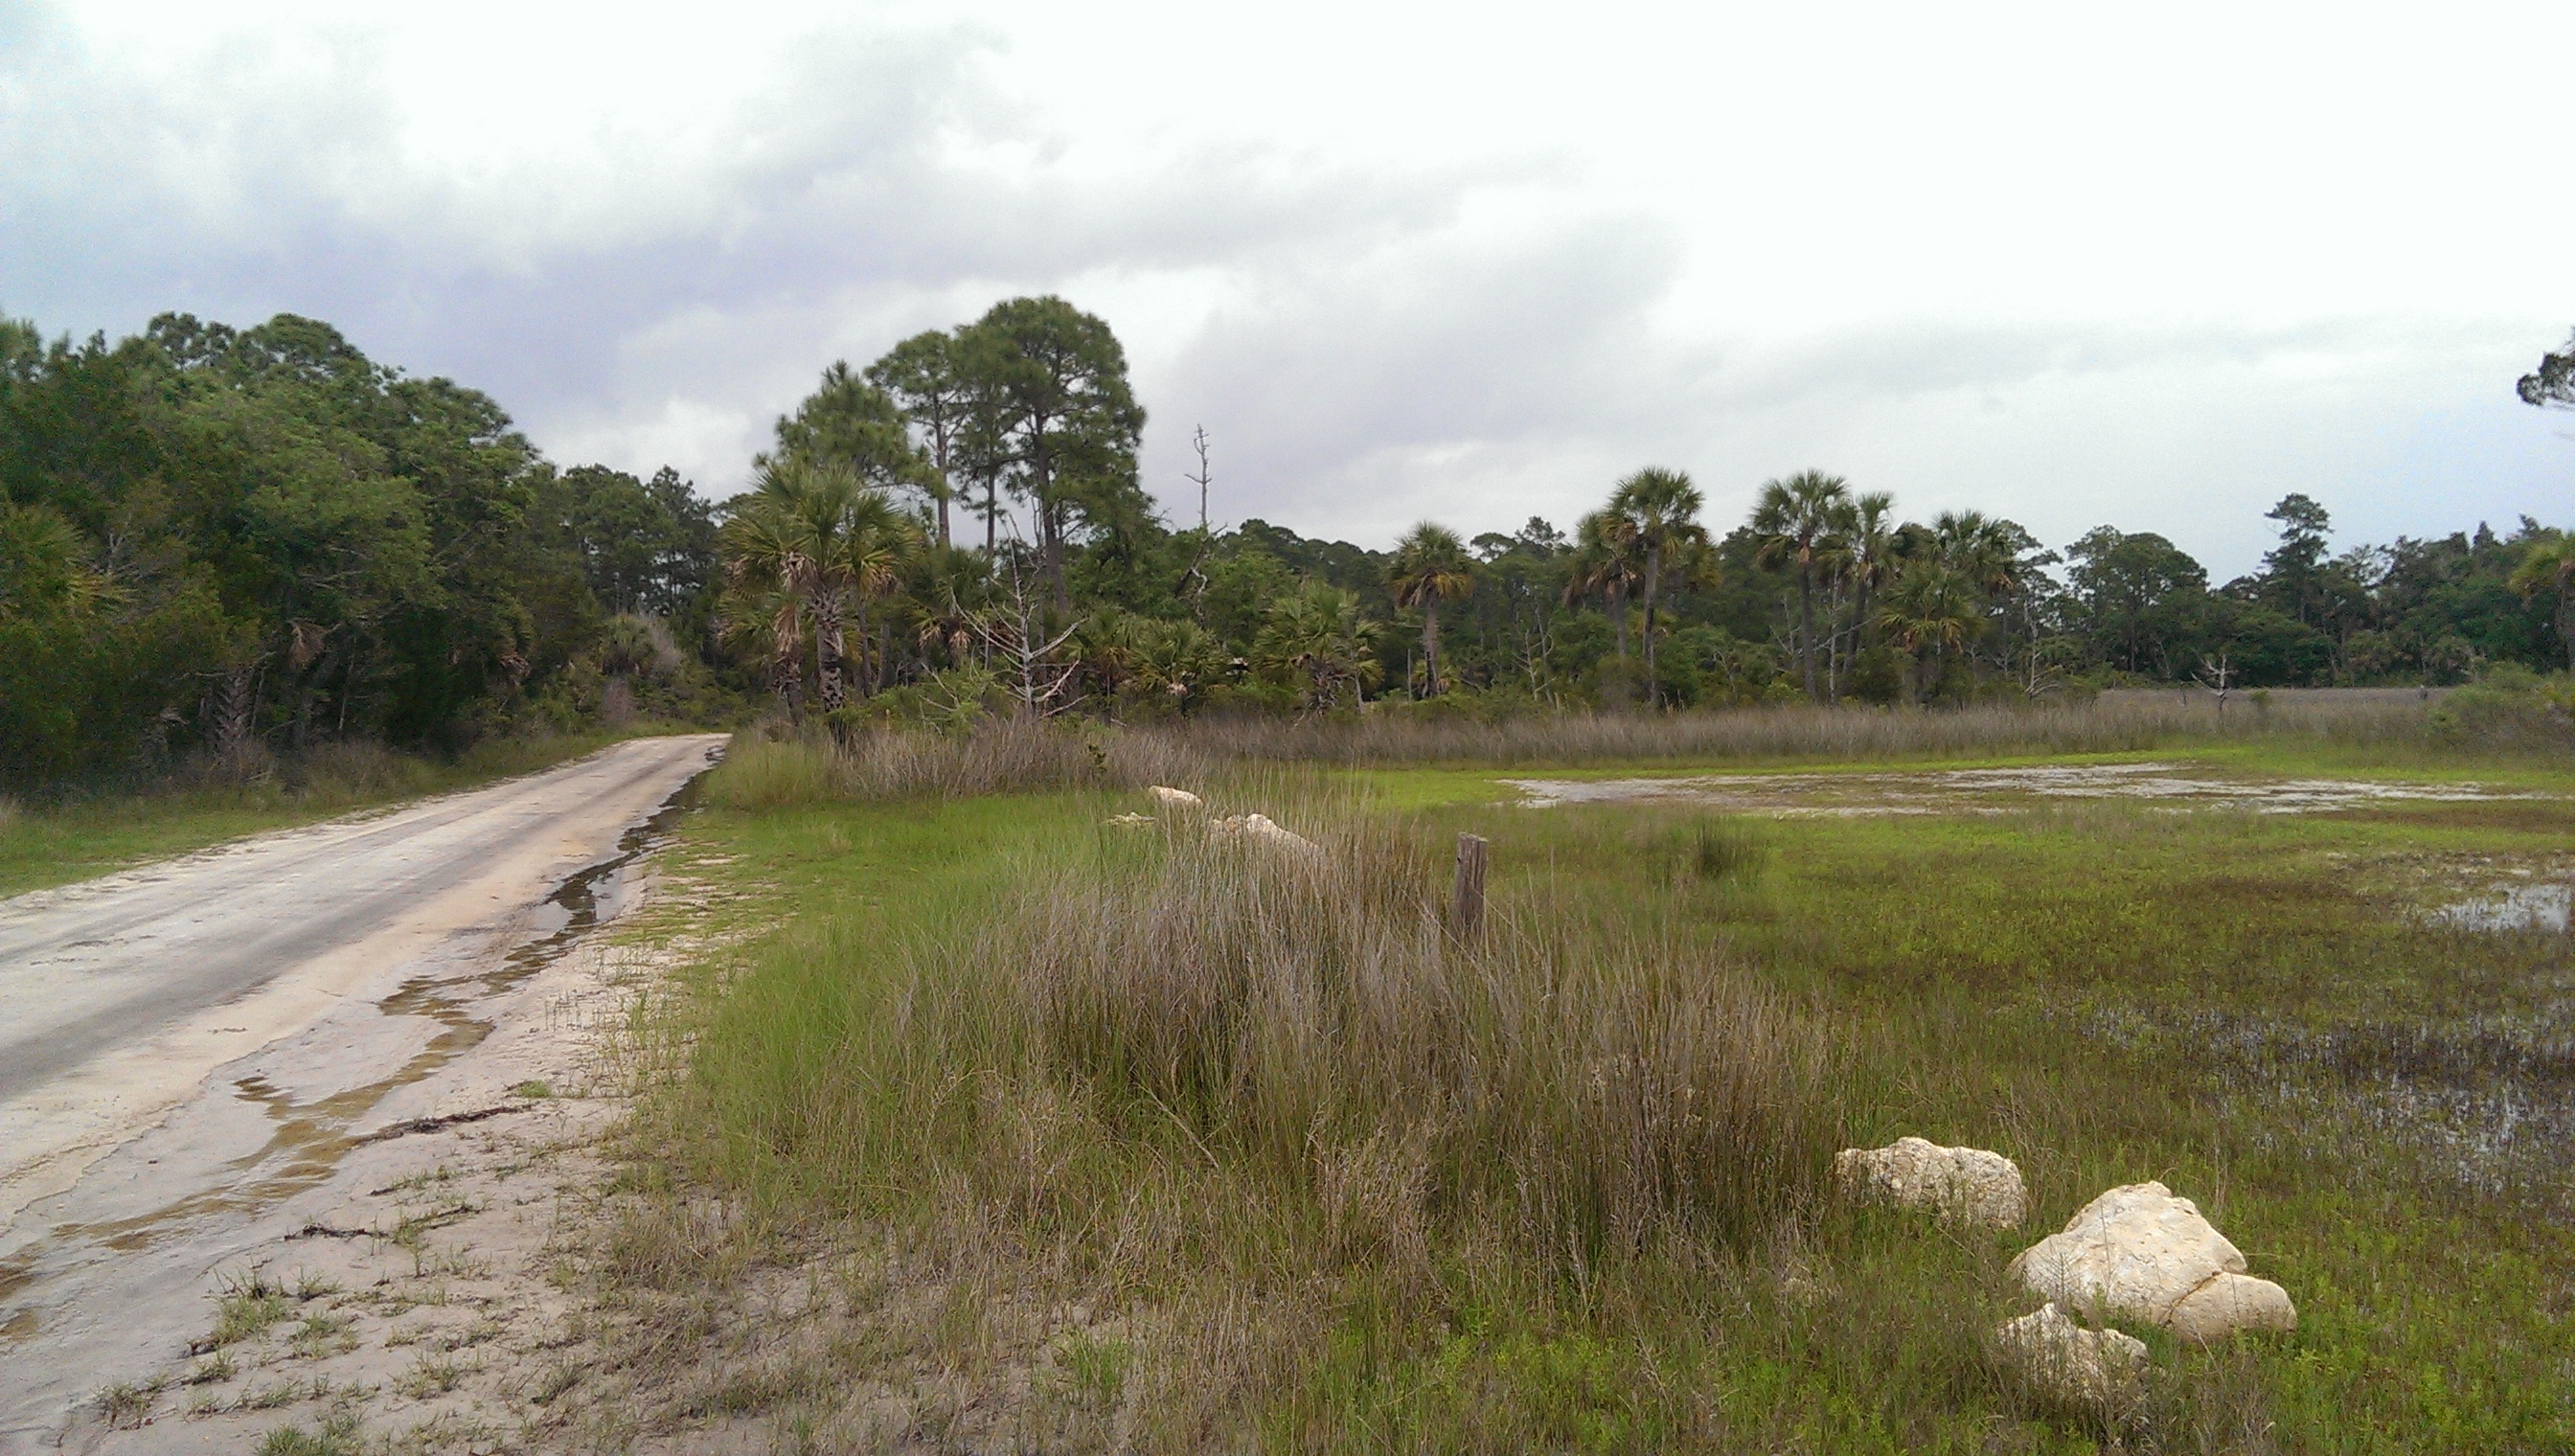 Wakulla Springs: Old road leading to the Gulf of Mexico